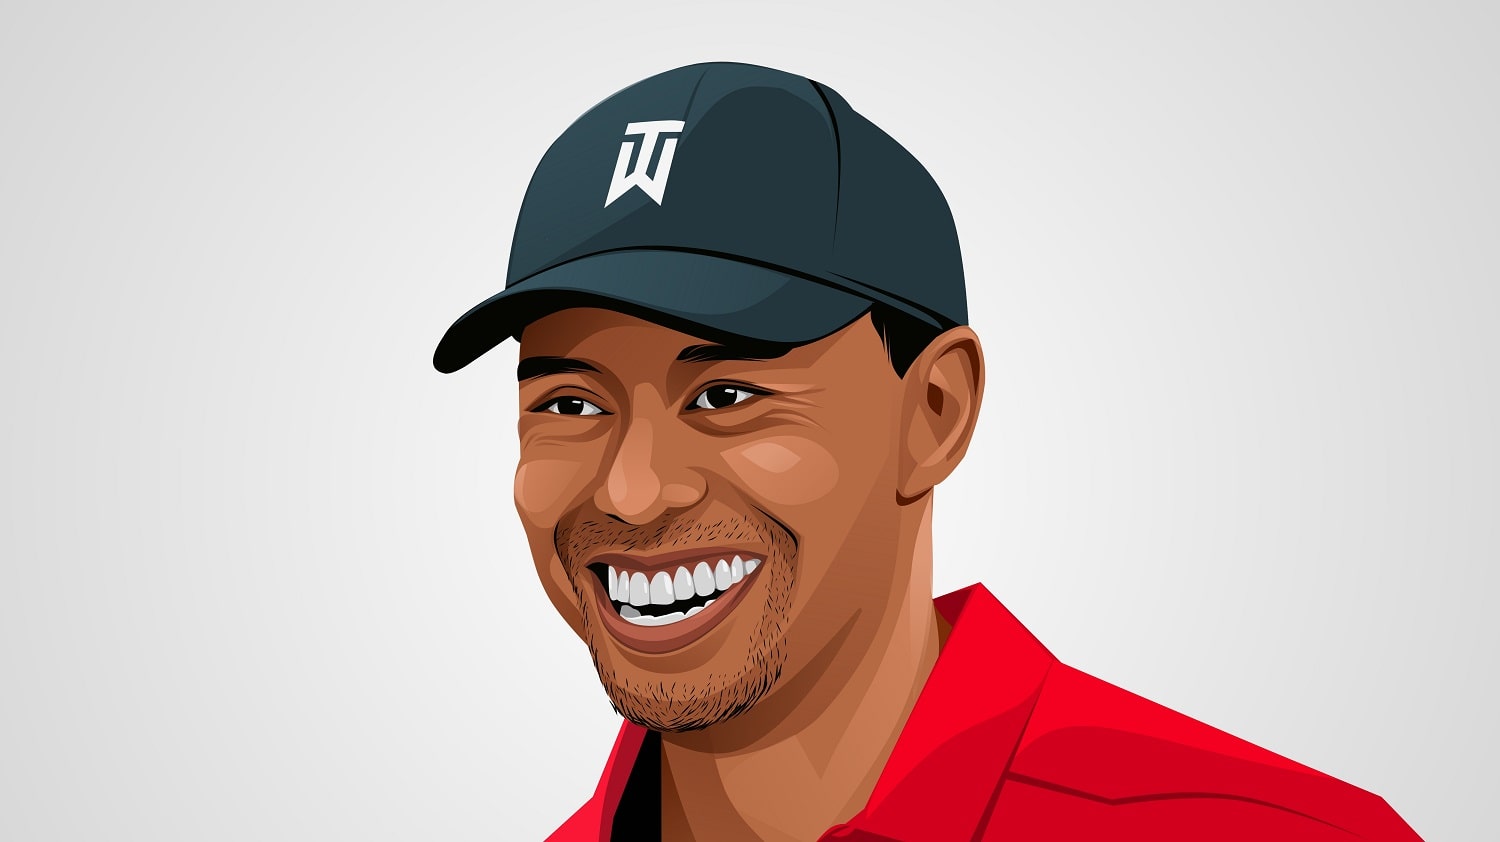 Tiger Woods Copyright by Inspirationfeed.